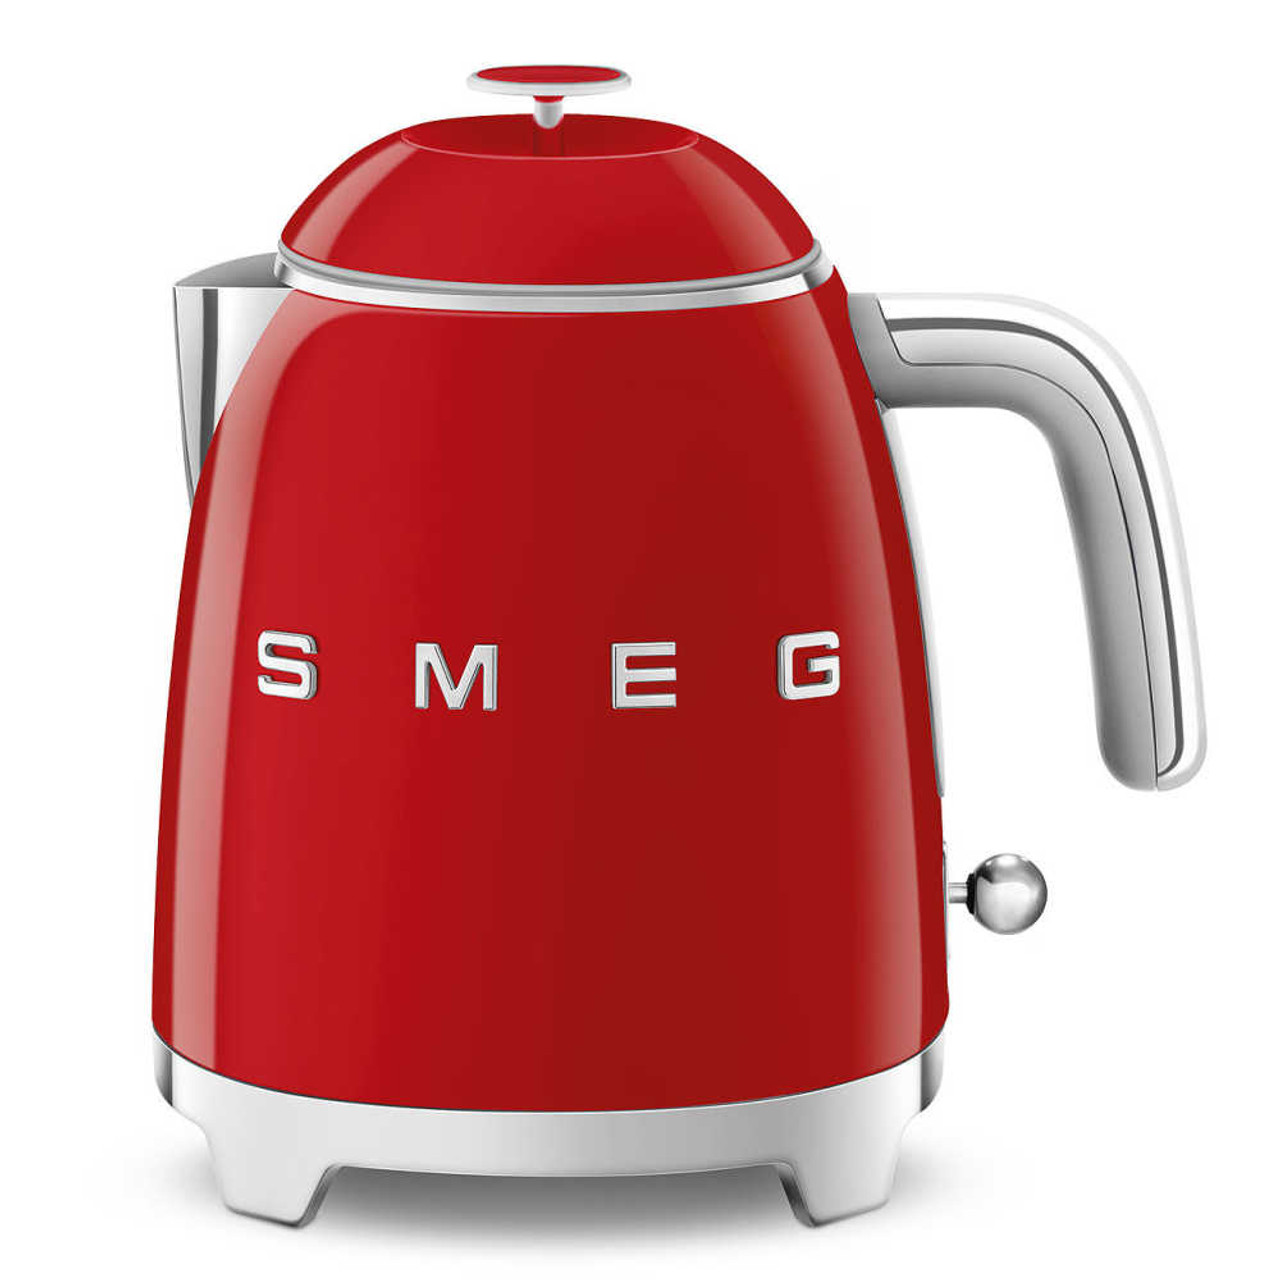 https://cdn11.bigcommerce.com/s-hccytny0od/images/stencil/1280x1280/products/4253/16130/smeg-mini-electric-kettle-red-4__50578.1655575155.jpg?c=2?imbypass=on